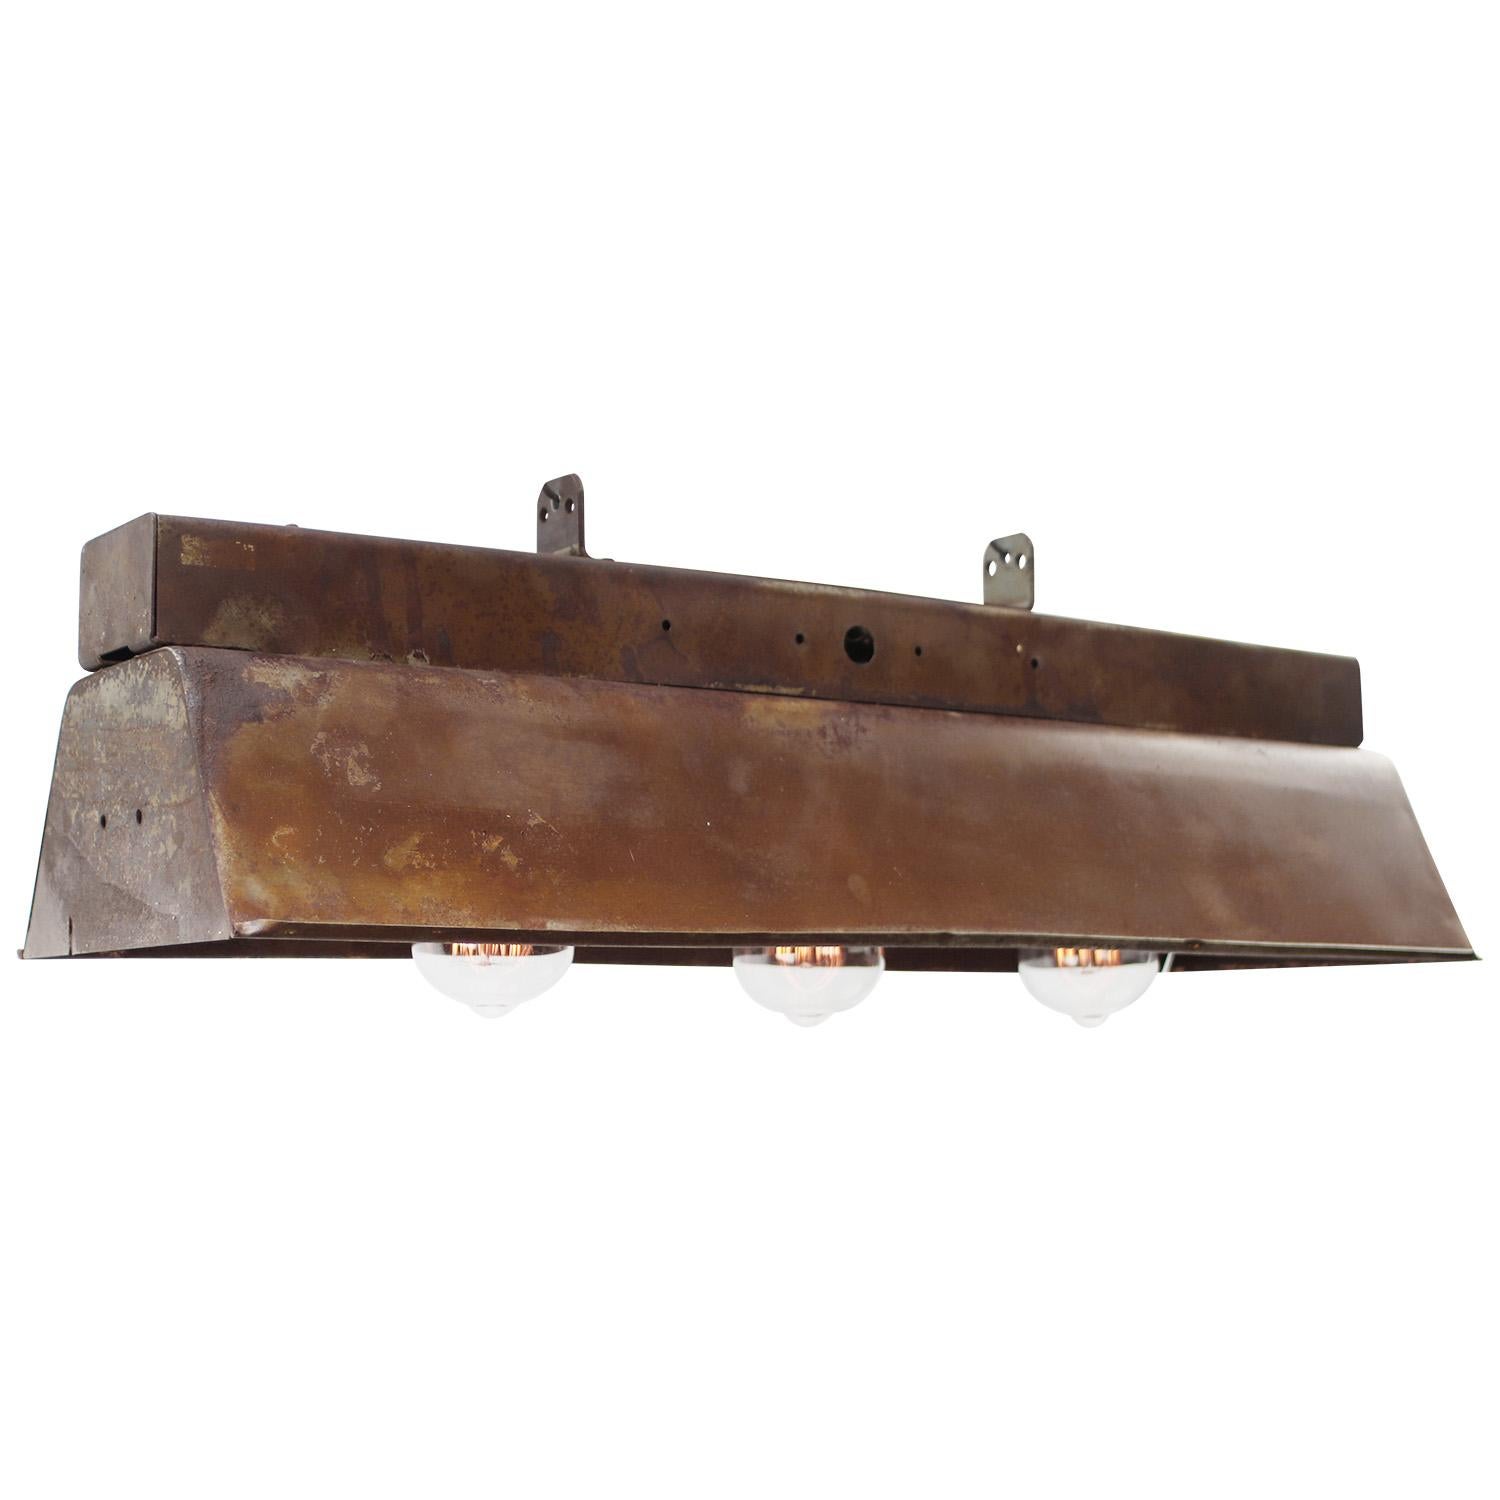 Rust metal film light.
Space for 3 bulbs.

Weight: 2.88 kg / 6.3 lb

Priced per individual item. All lamps have been made suitable by international standards for incandescent light bulbs, energy-efficient and LED bulbs. E26/E27 bulb holders and new